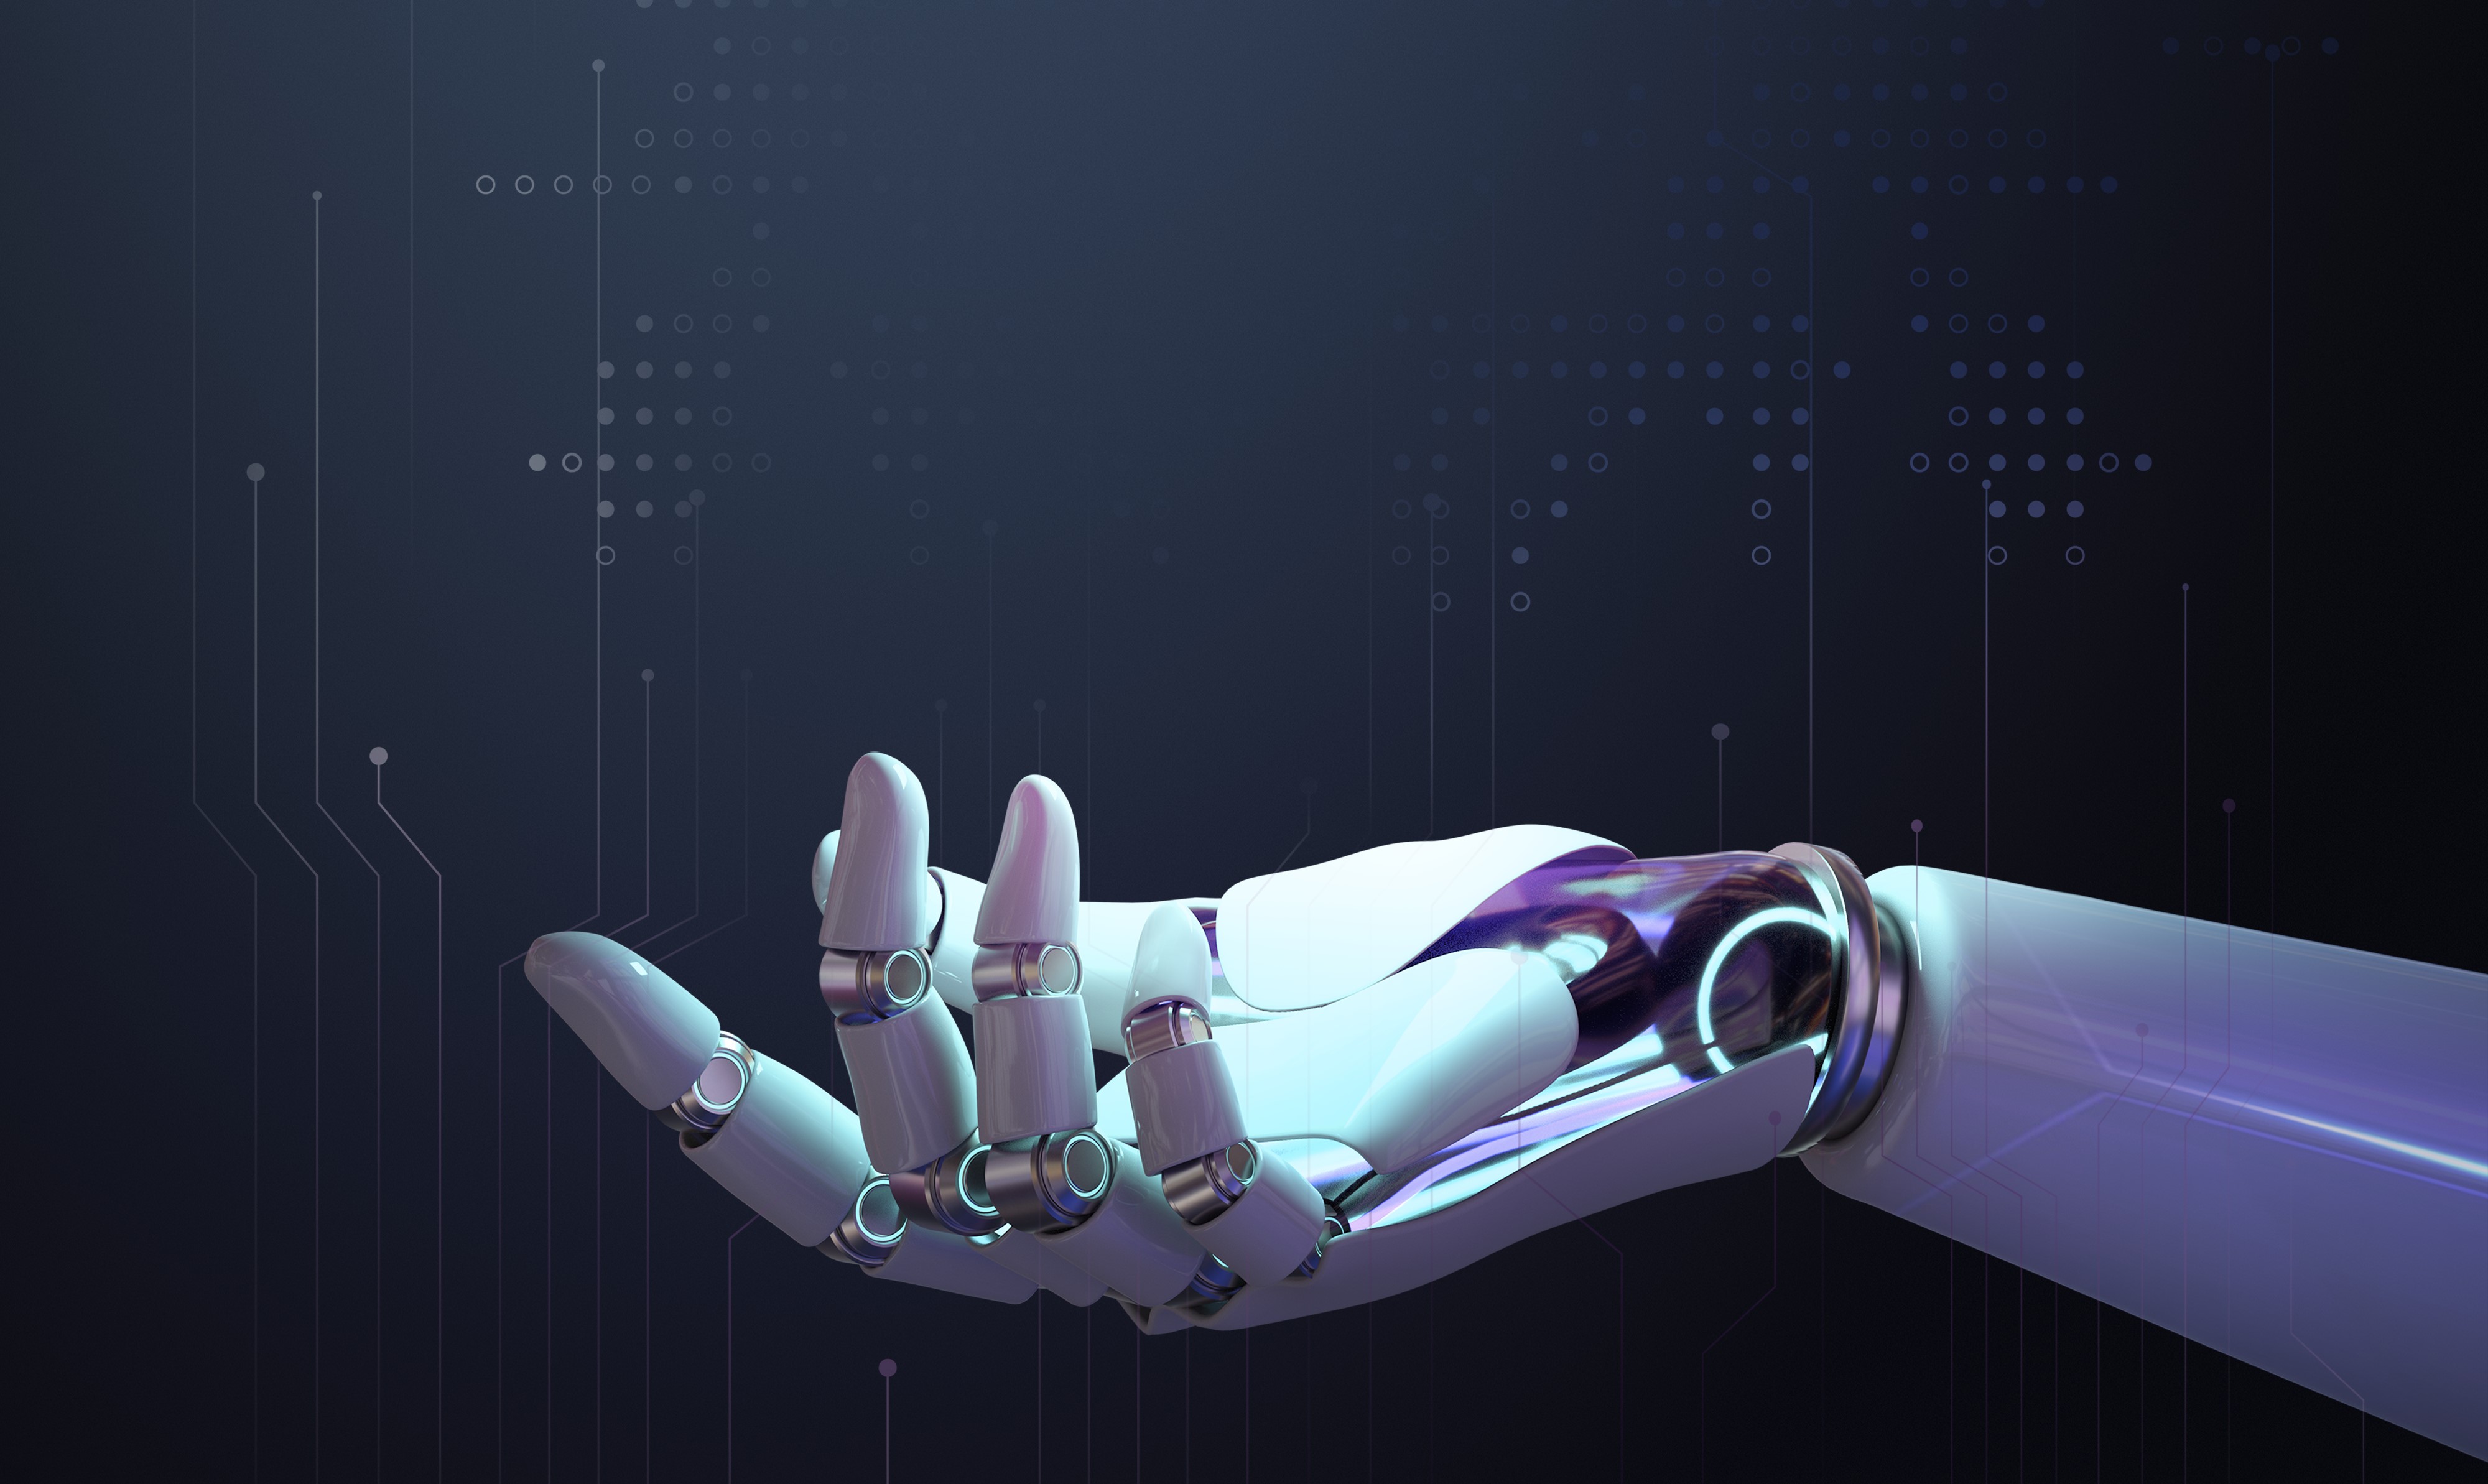 image of a robot hand on a dark background